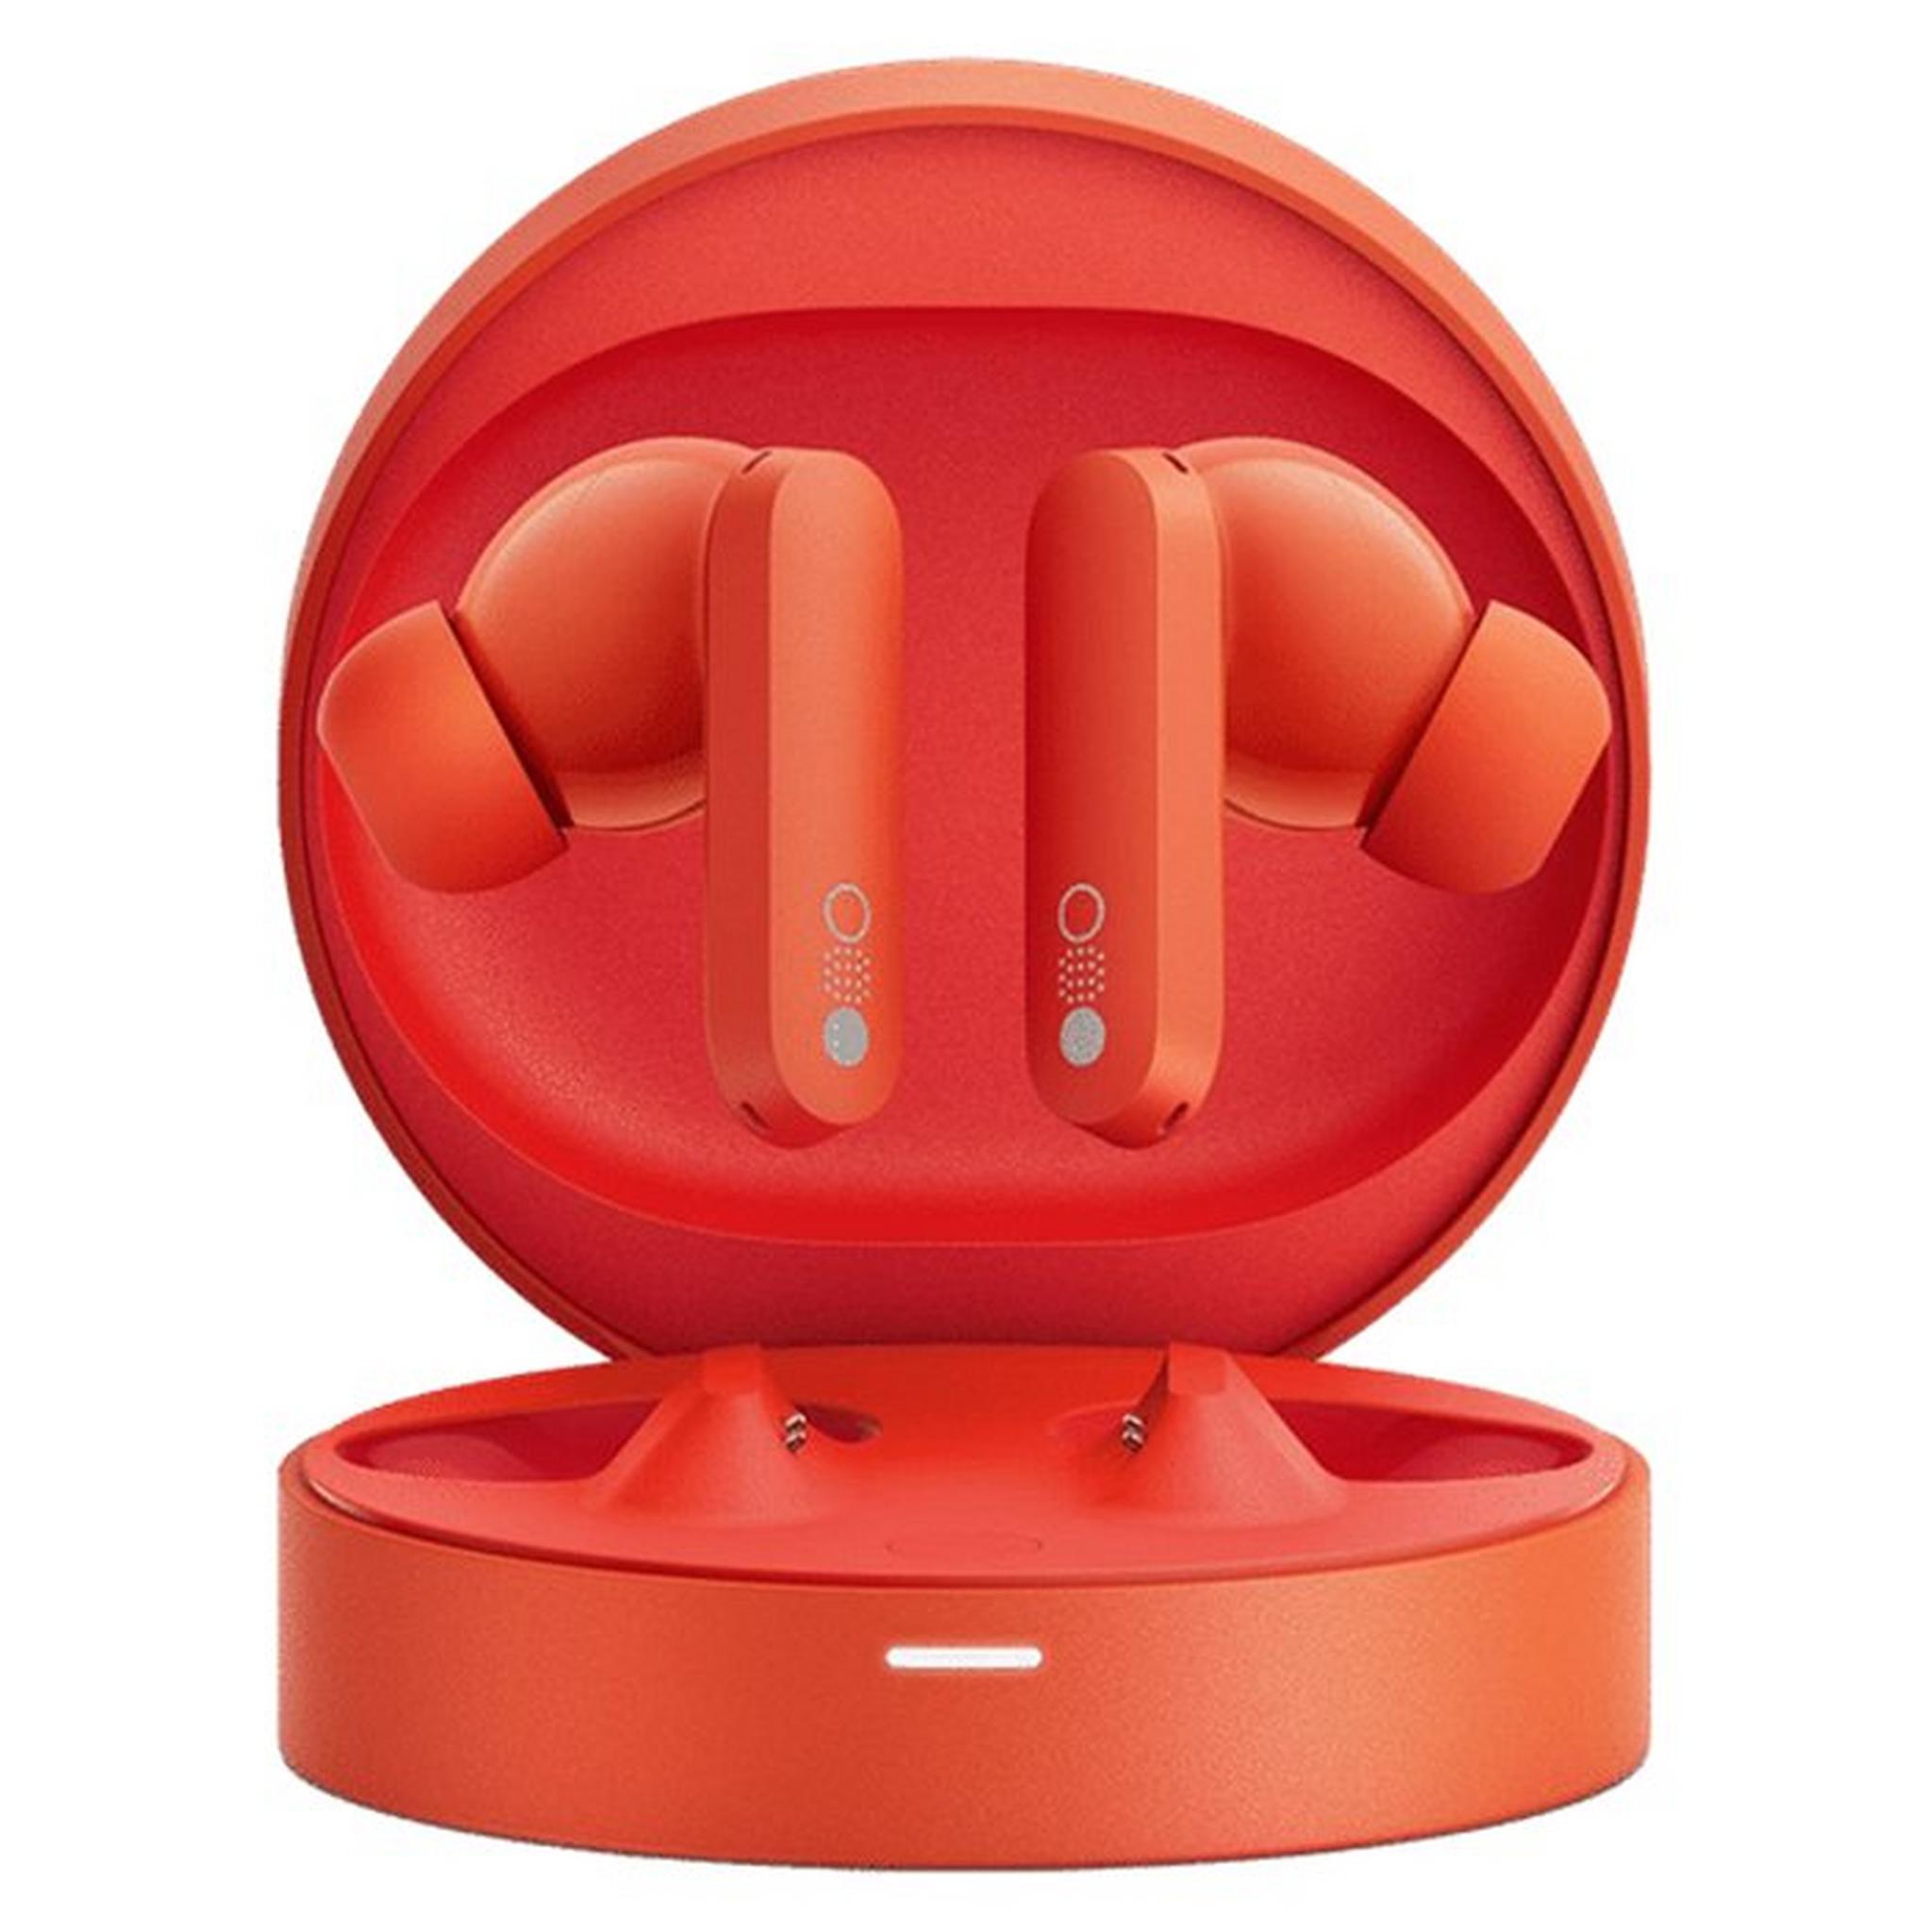 Nothing CMF Buds Pro Wireless Earbuds, A10600035 - Orange